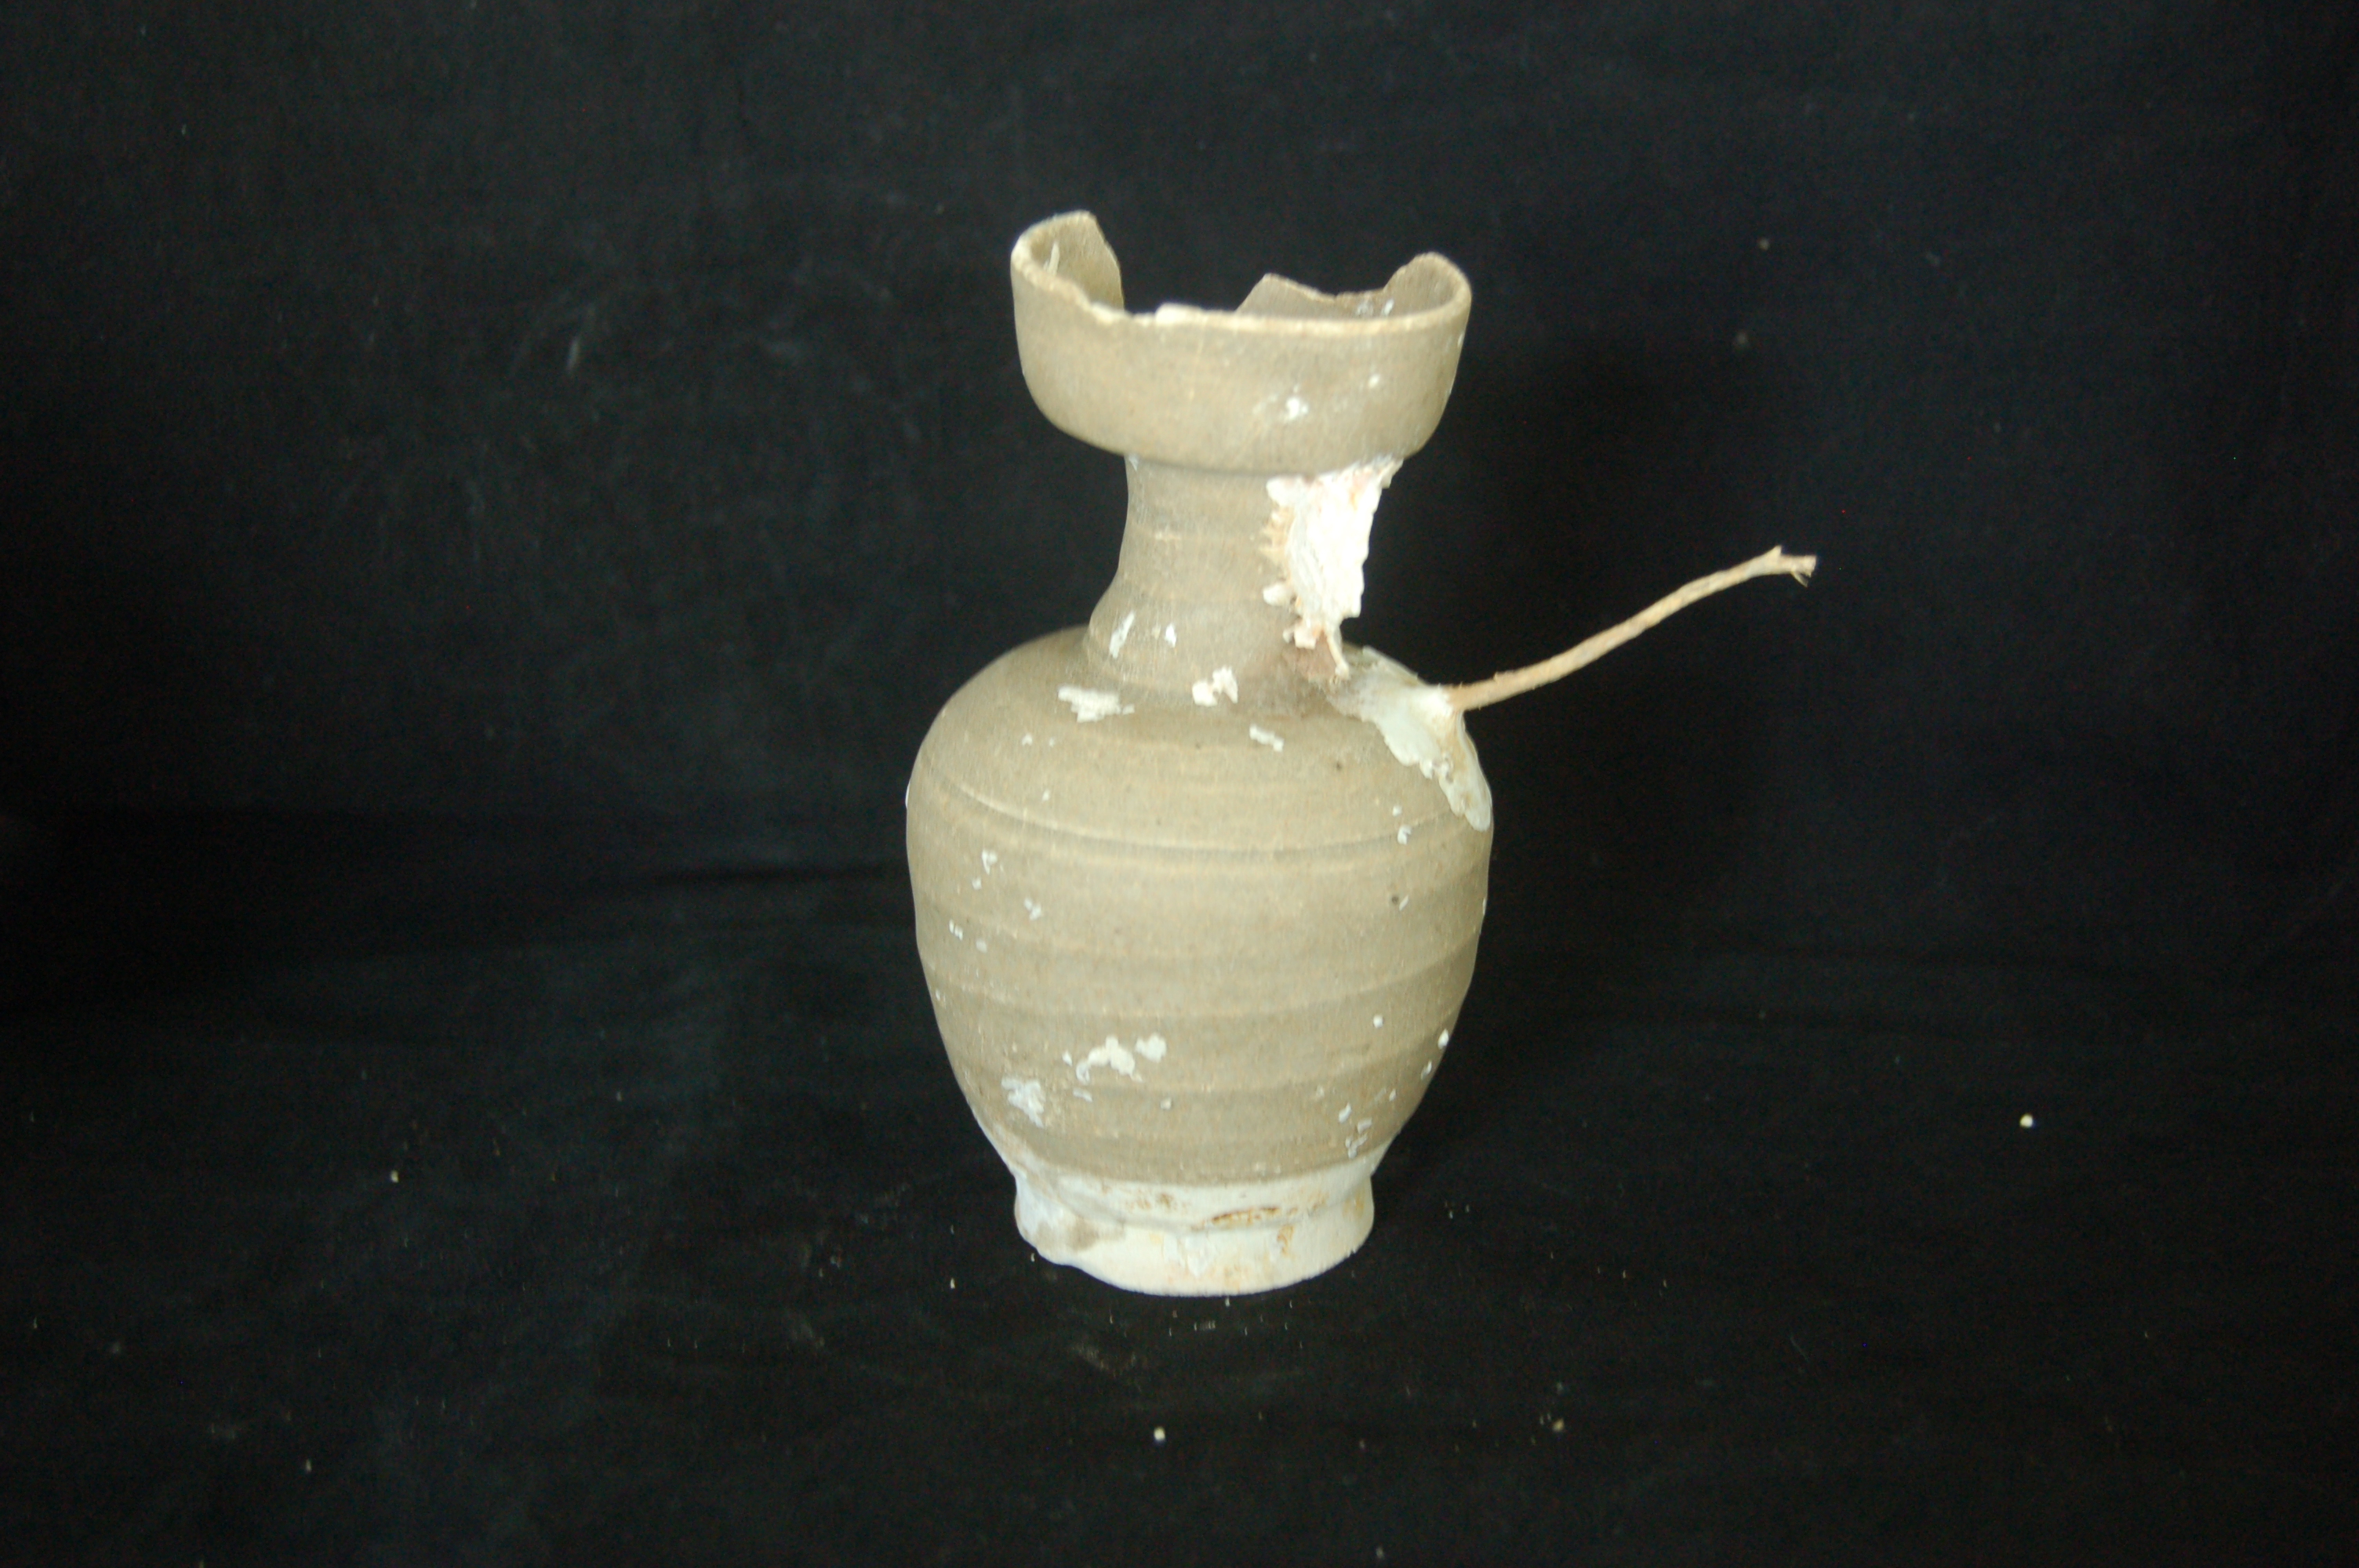 Small vase with a tapering neck and a flared cup-like mouth. The carved foot-ring is slightly flared. Diameter 8 cm, height 14 cm.